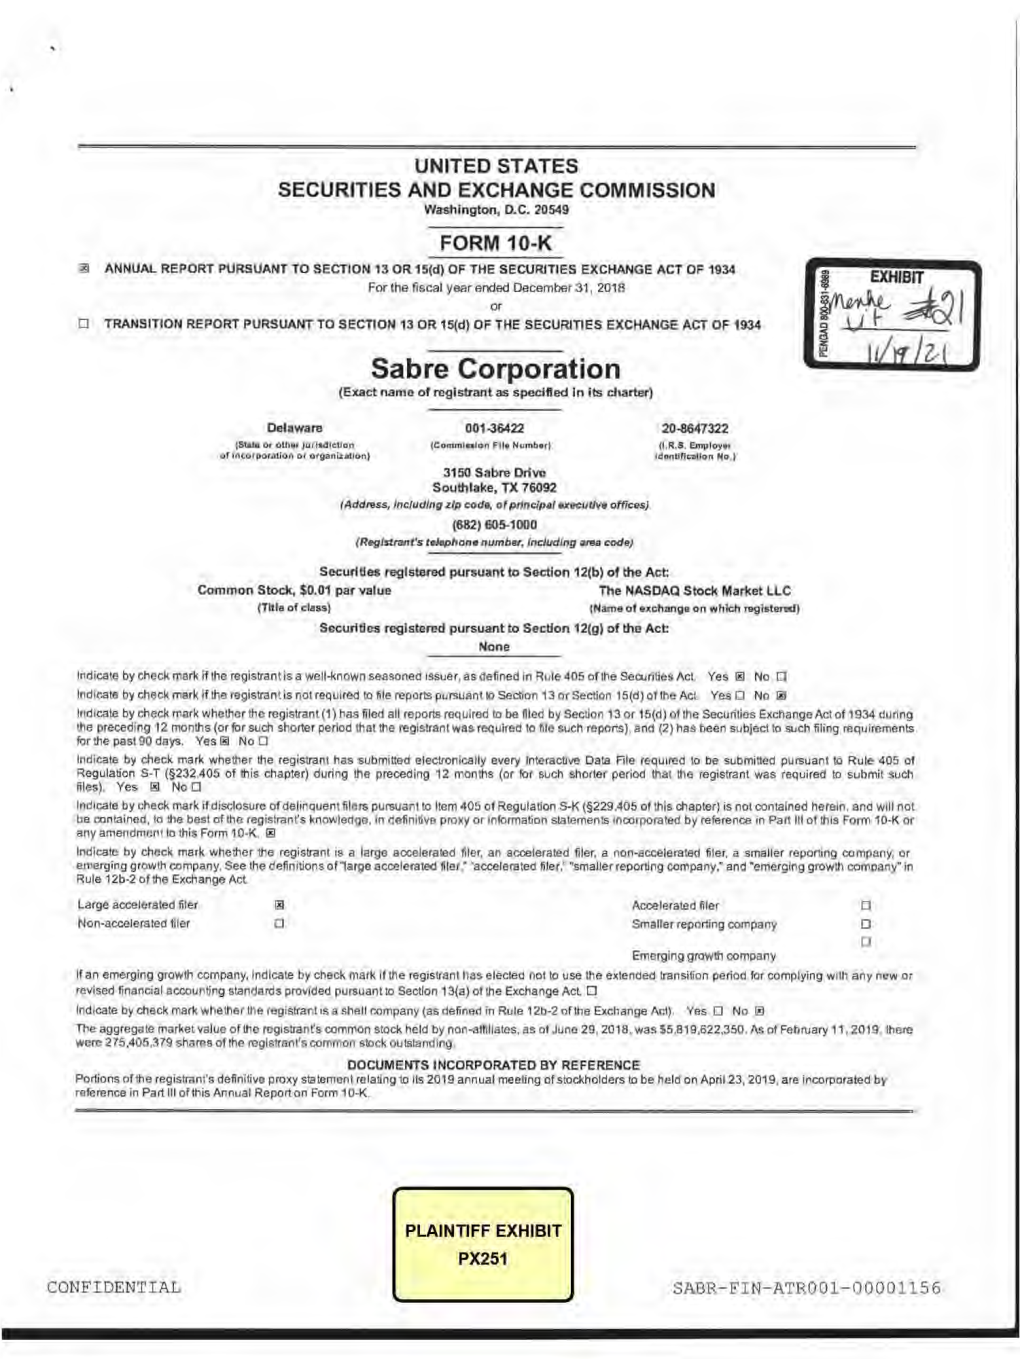 Sabre Corporation (Exact Name of Registrant As Specified in Its Charter)